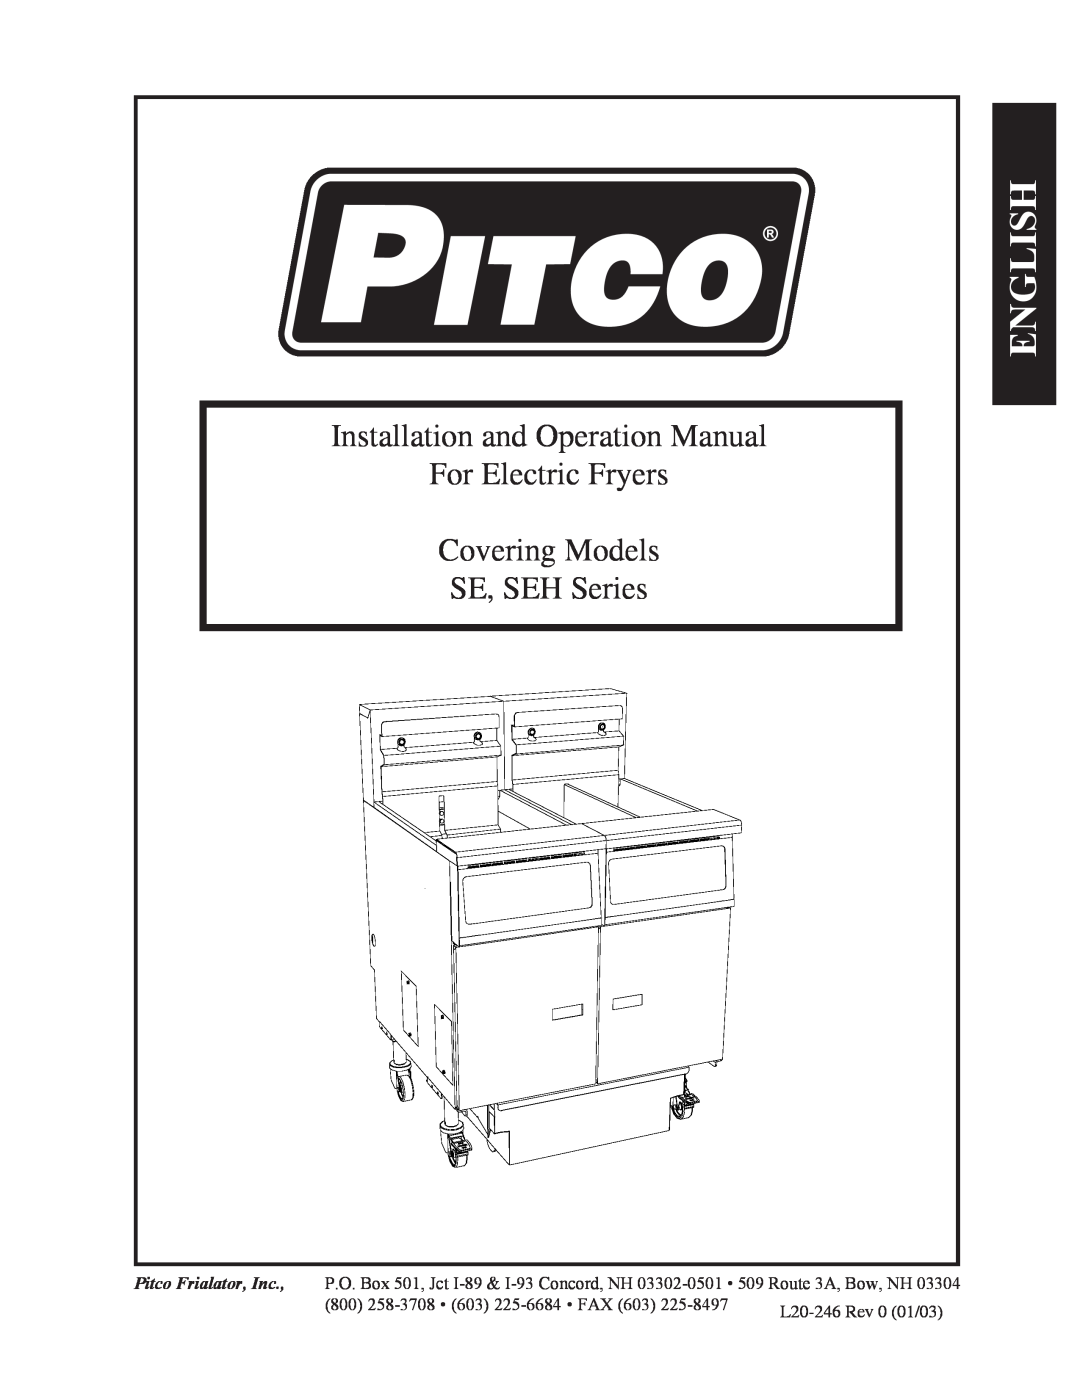 Pitco Frialator manual English, For Electric Fryers, Covering Models, SE, SEH Series 